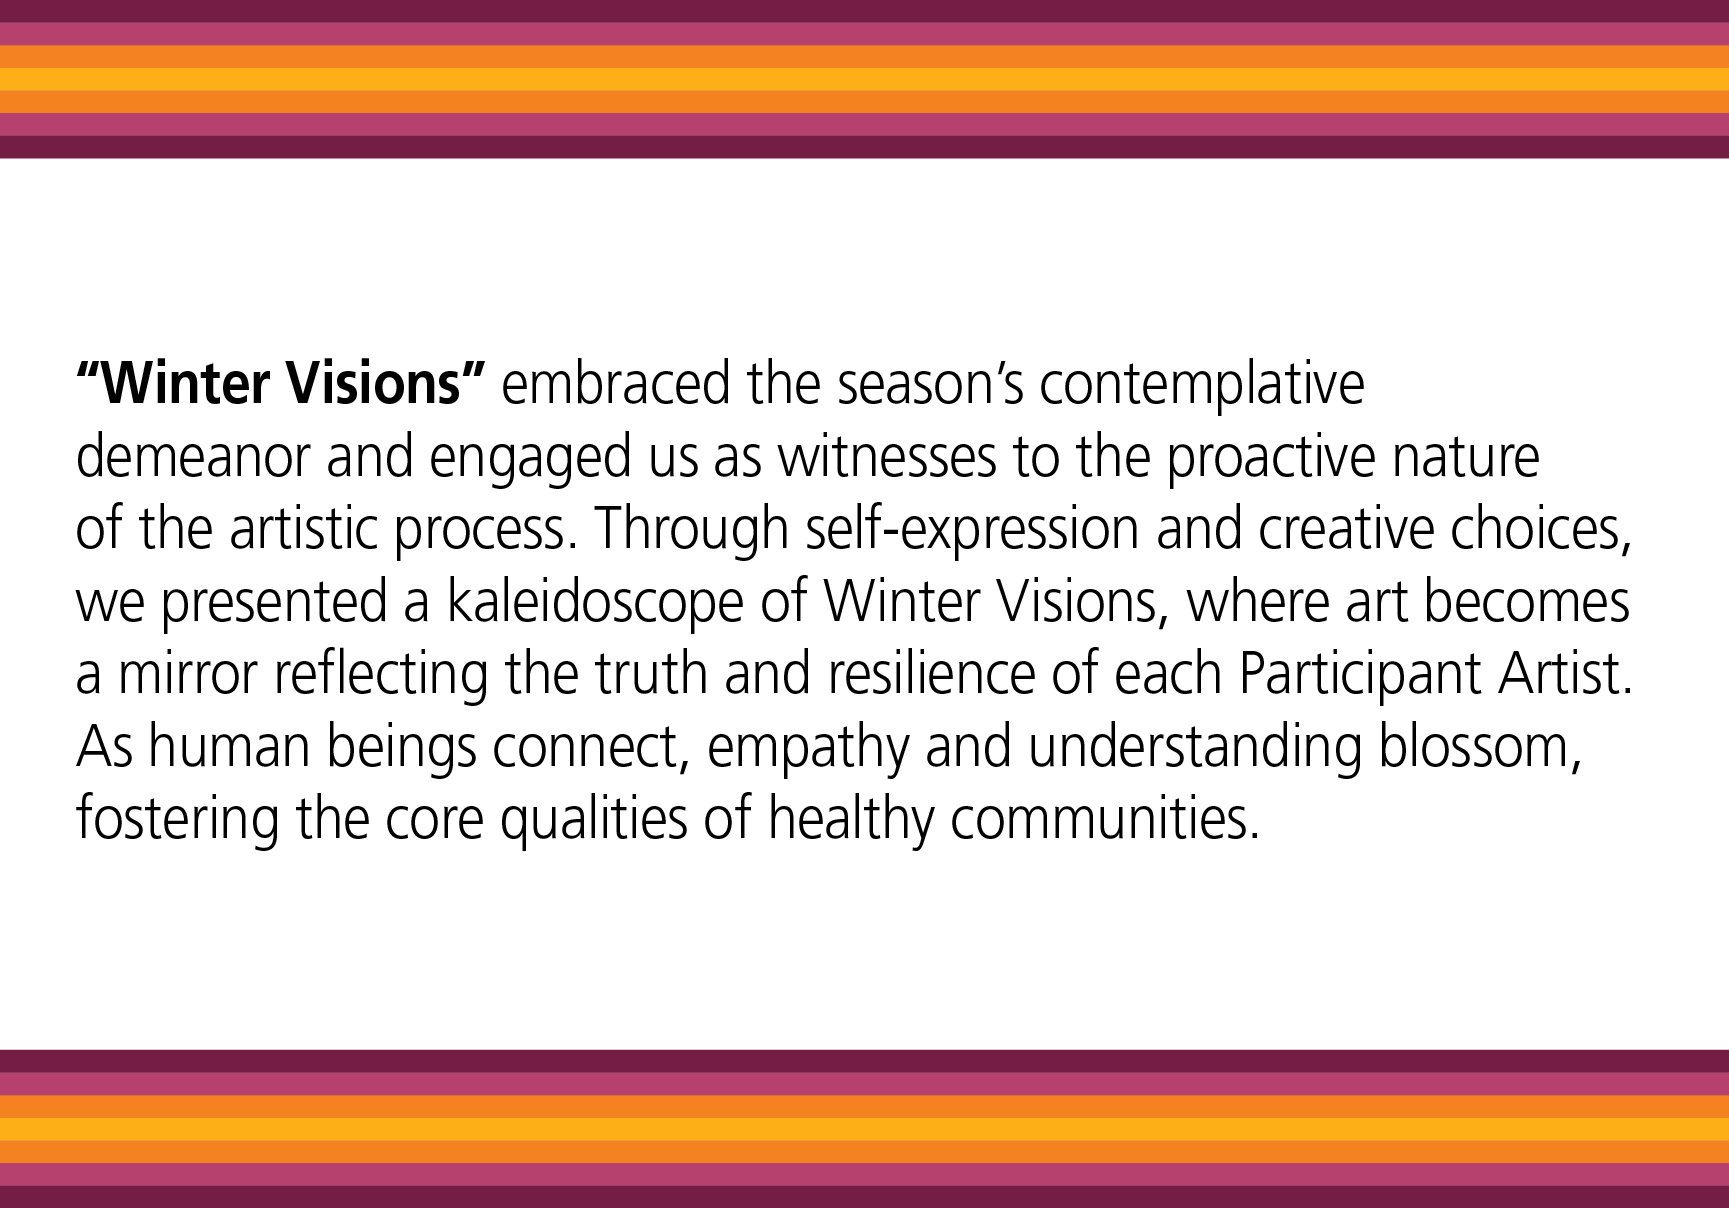 Winter Visions embraced the season’s contemplative demeanor and engaged us as witnesses to the proactive nature of the artistic process. Through self-expression and creative choices, we presented a kaleidoscope of Winter Visions, where art becomes a mirror reflecting the truth and resilience of each Participant Artist. As human beings connect, empathy and understanding blossom, fostering the core qualities of healthy communities.